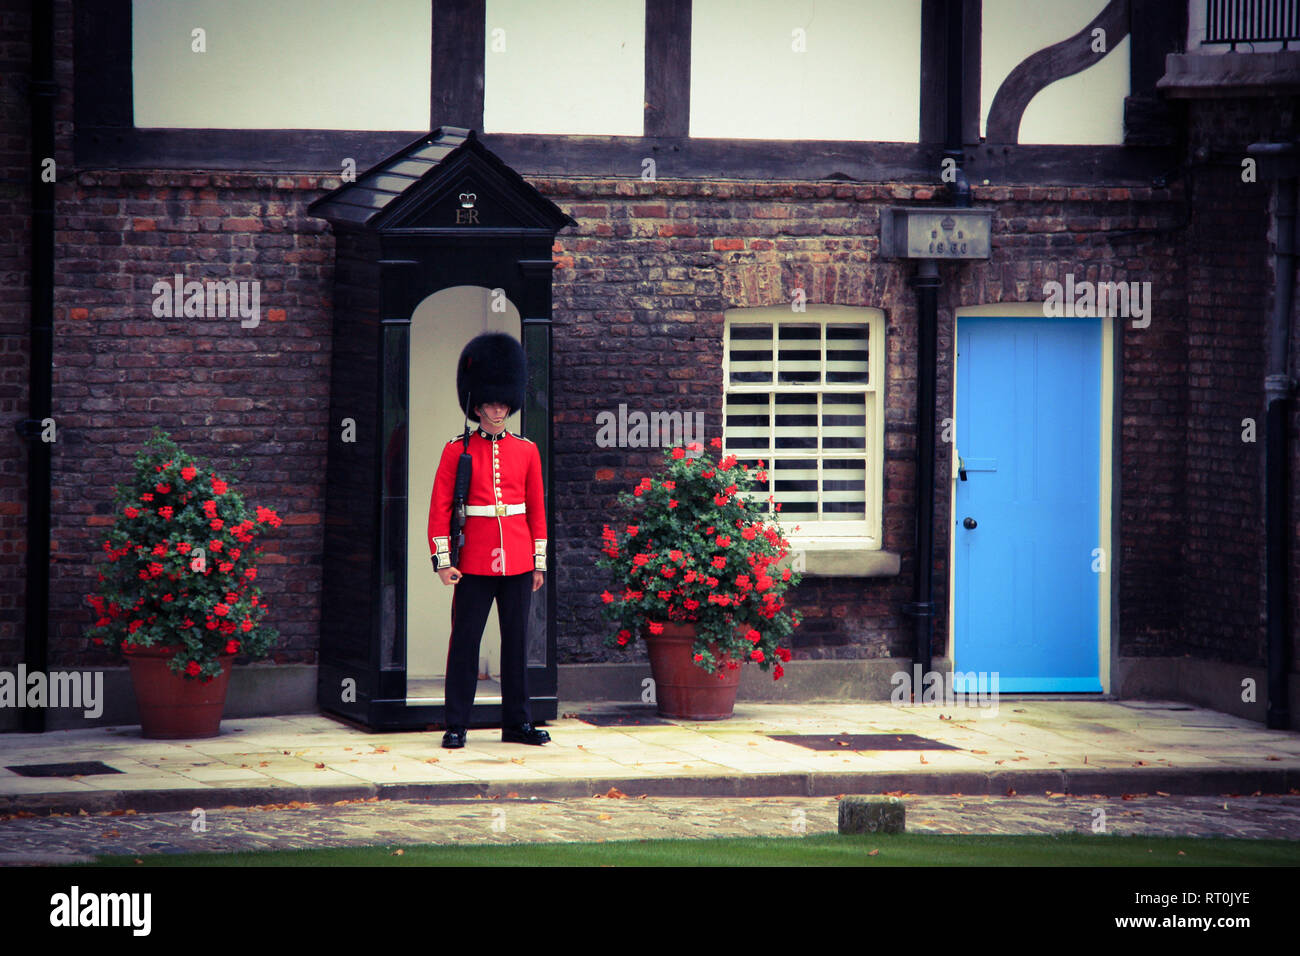 Grenadier Guard and sentry box in front of the Queen's House at Her Majesty's Royal Palace and Fortress of the Tower of London - London, UK Stock Photo